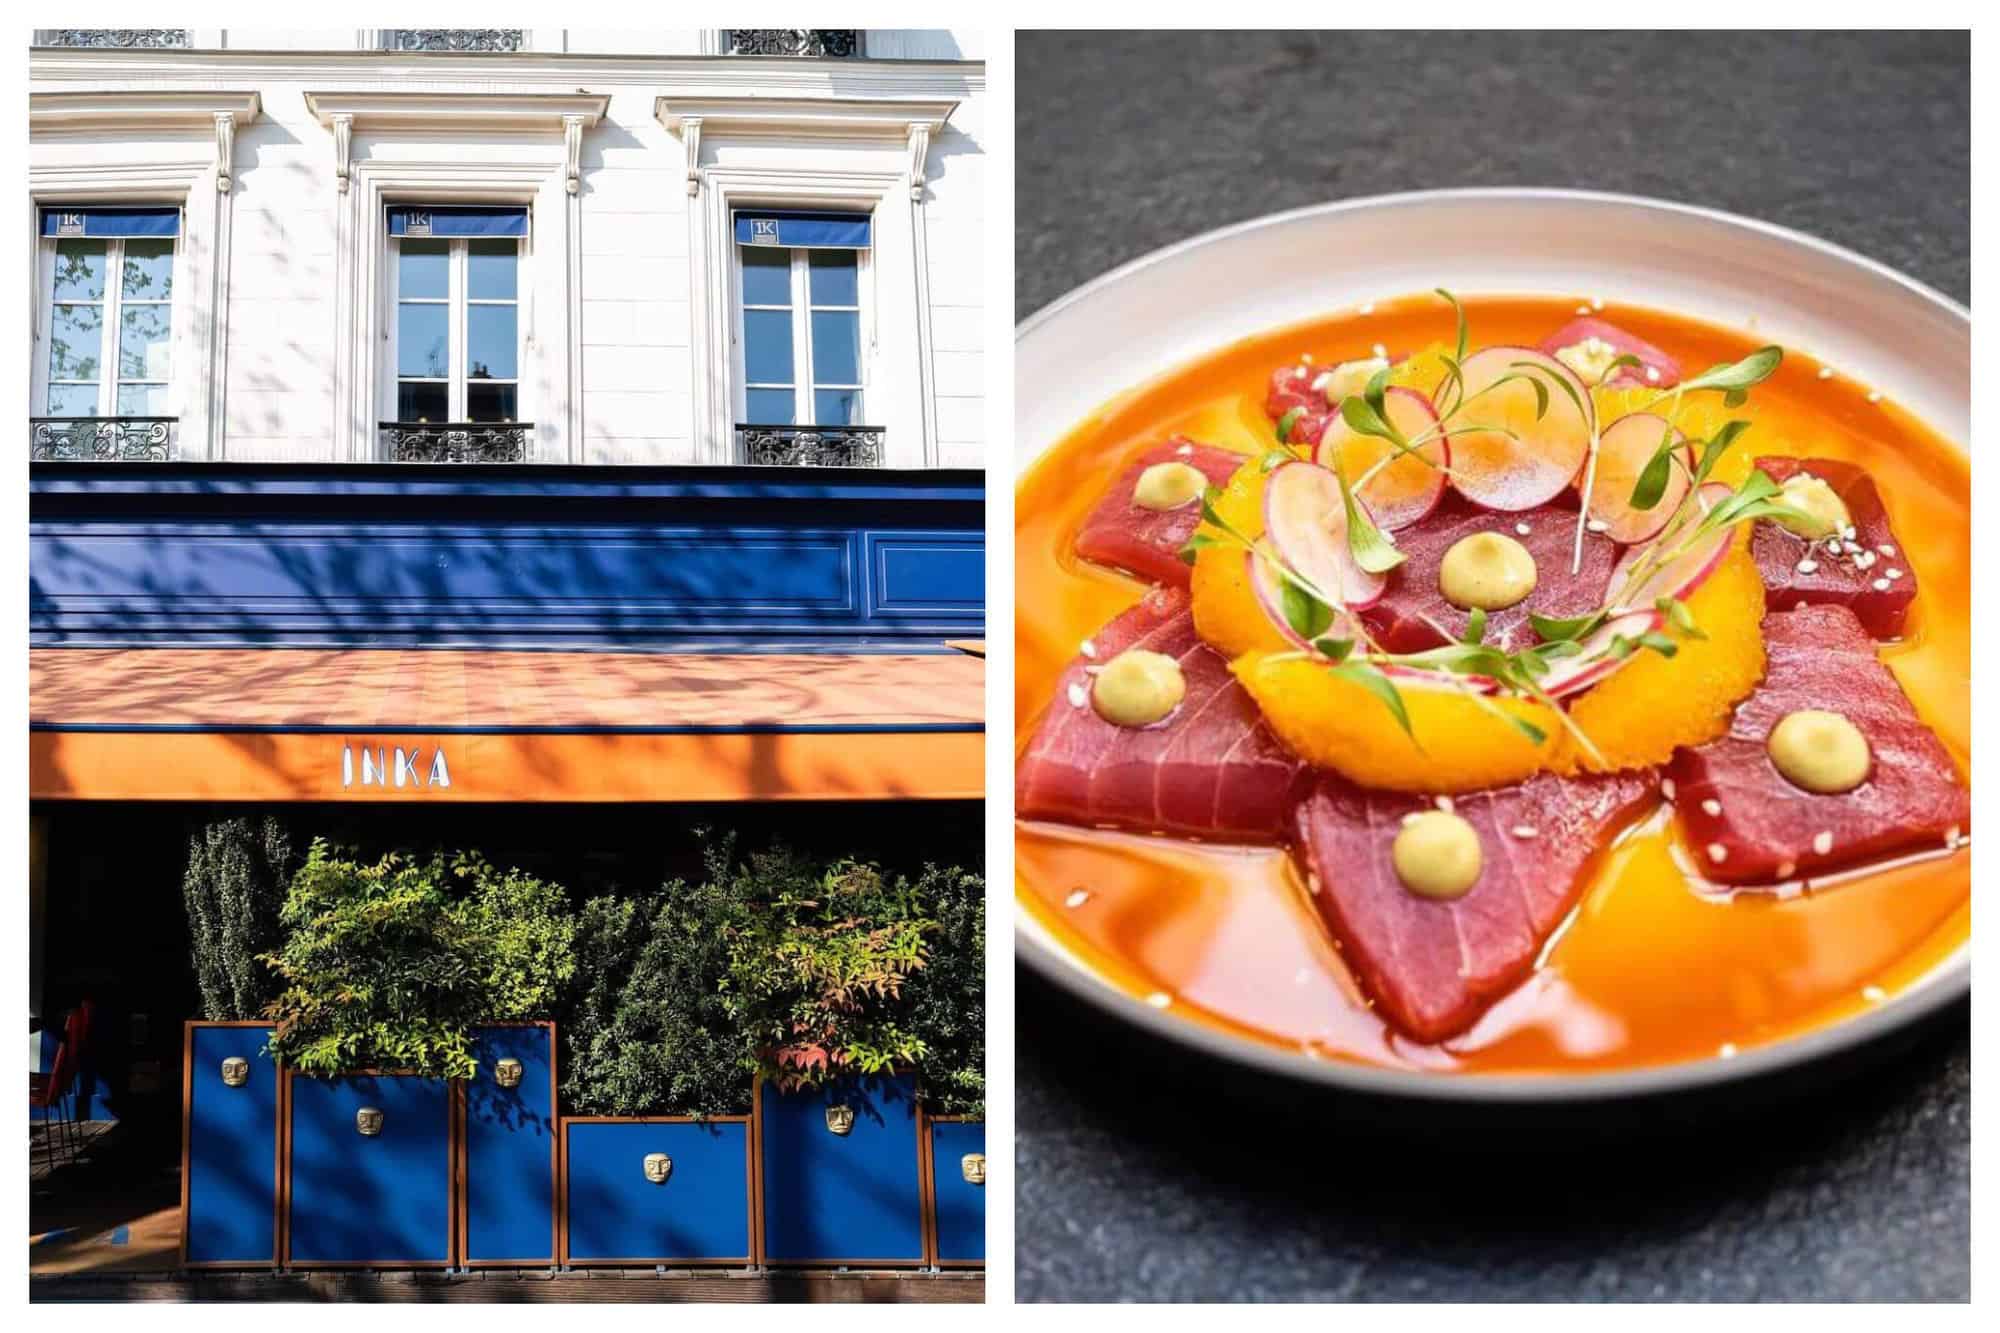 Left: The outside of a blue restaurant with an orange awning and green bushes. Right: A plate of raw pink fish with yellow fruit and on top of an orange sauce. 